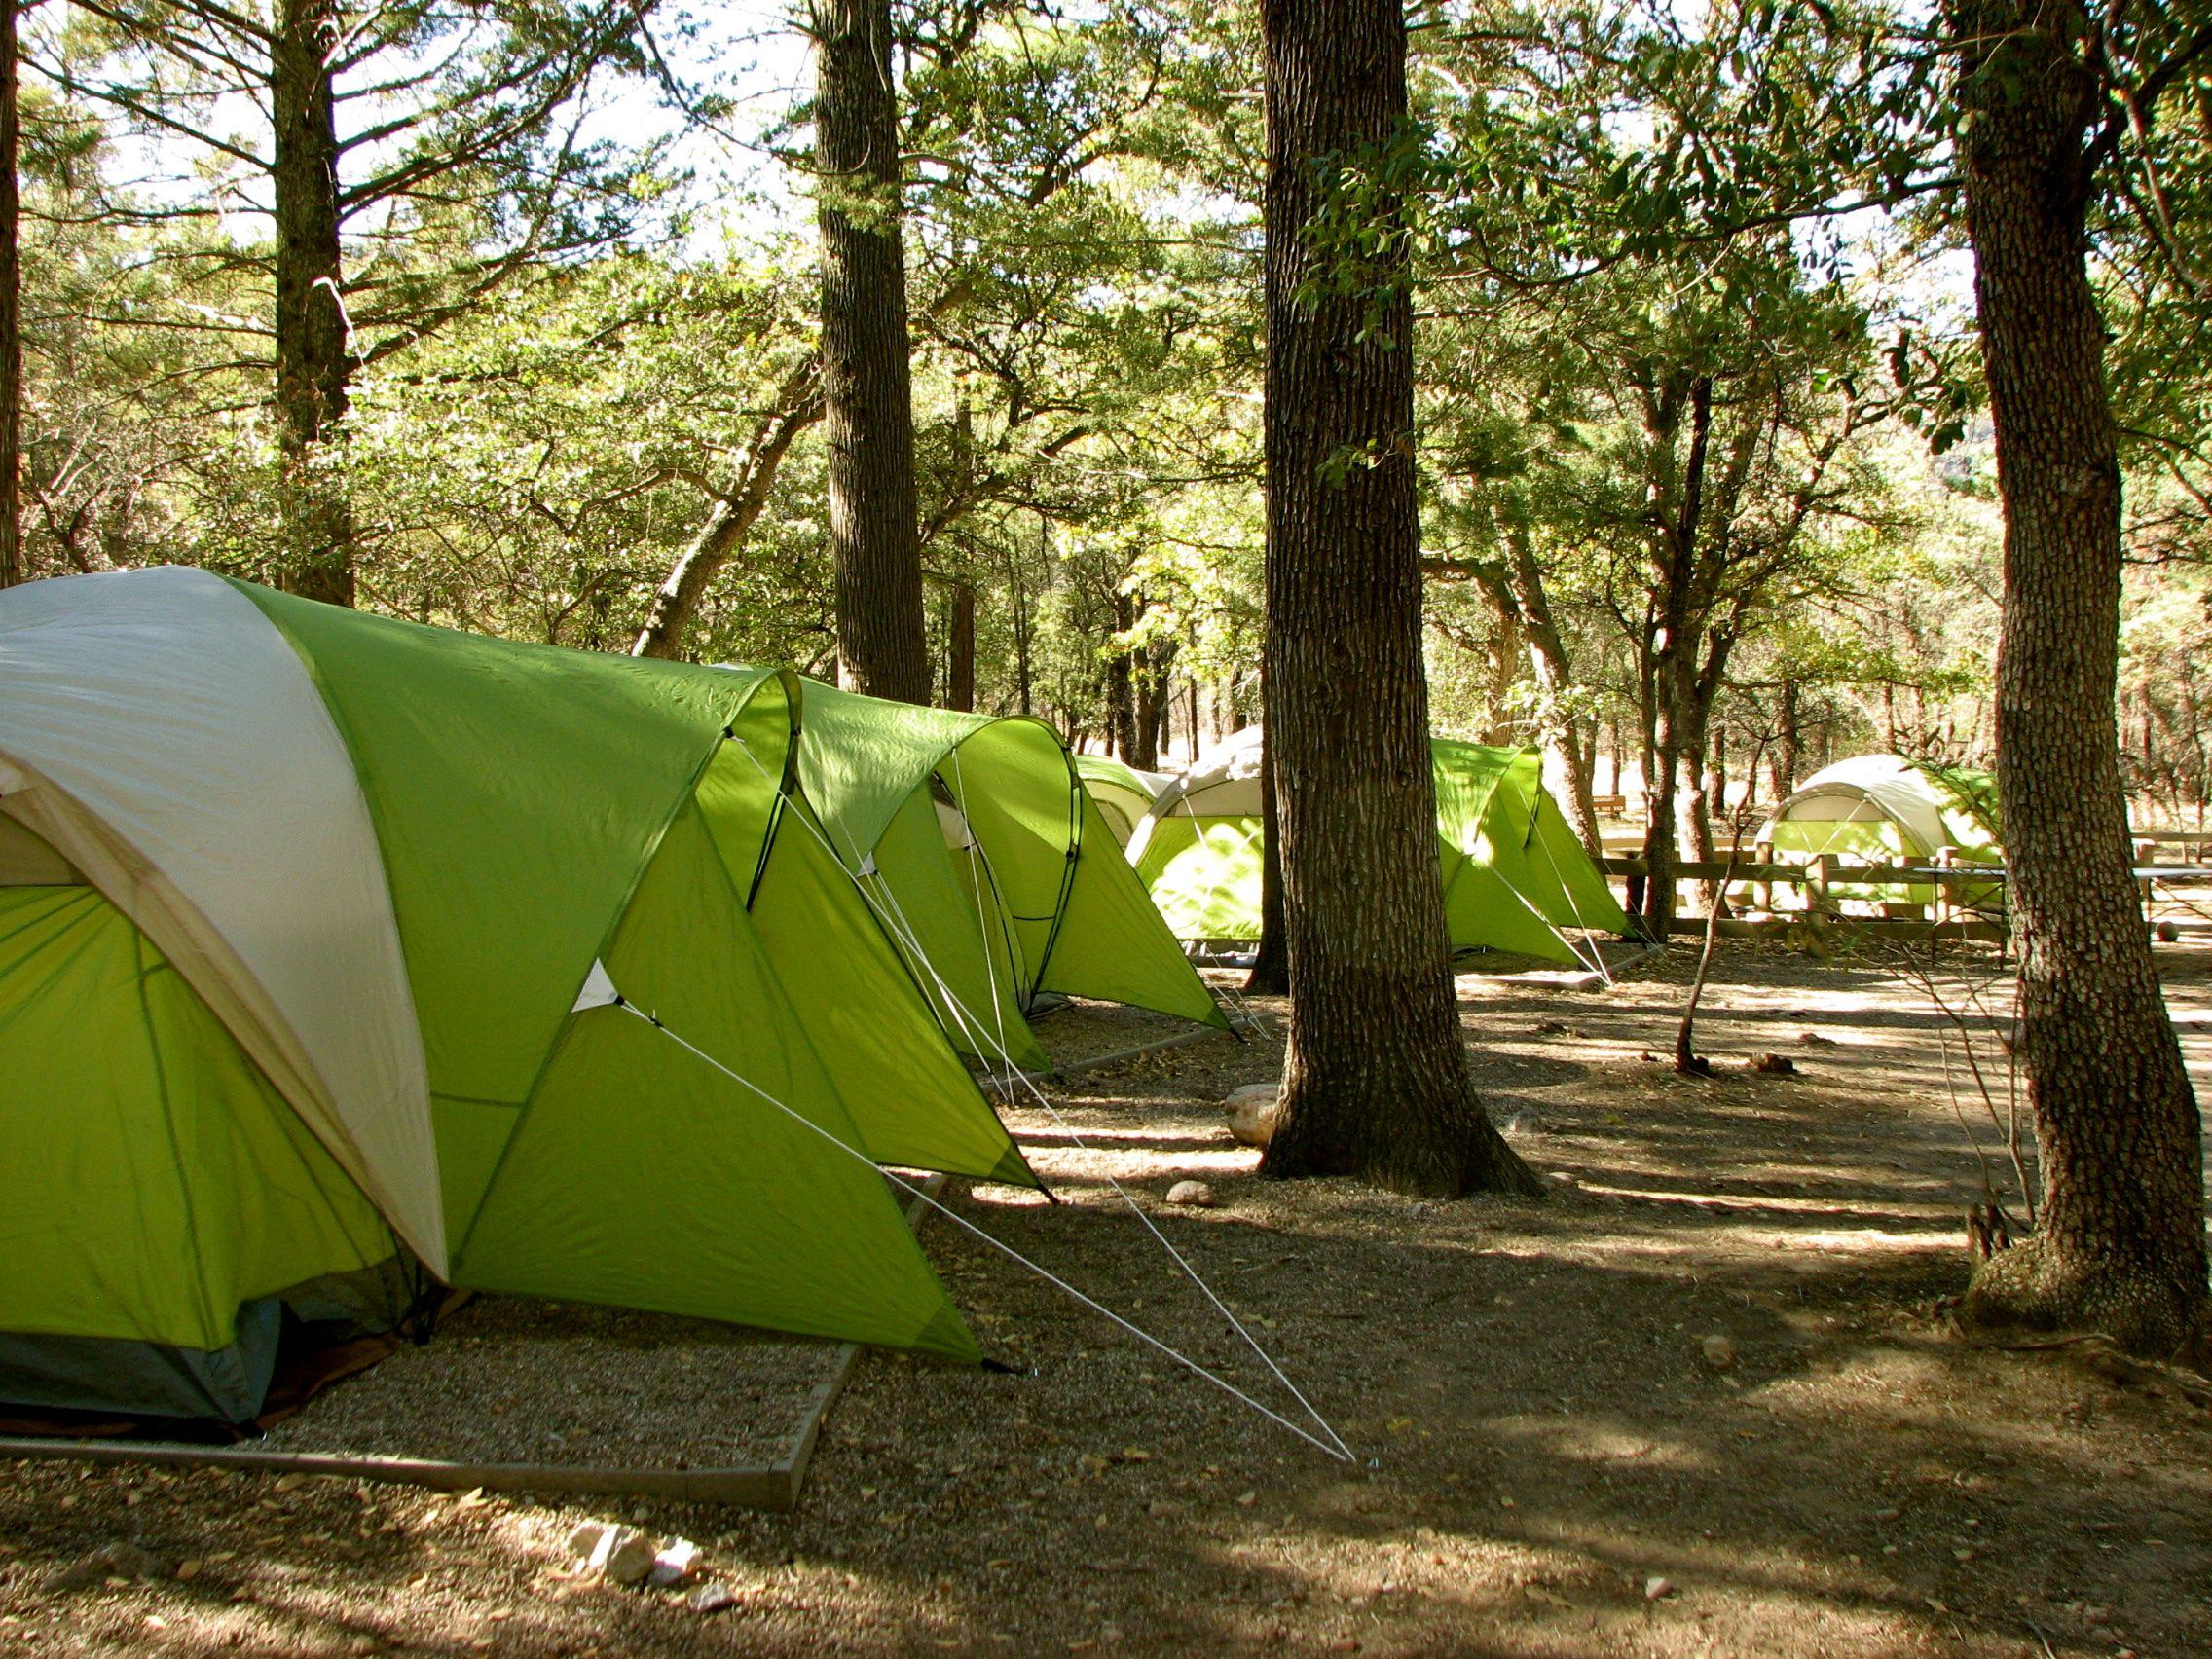 Tents set up under pine trees